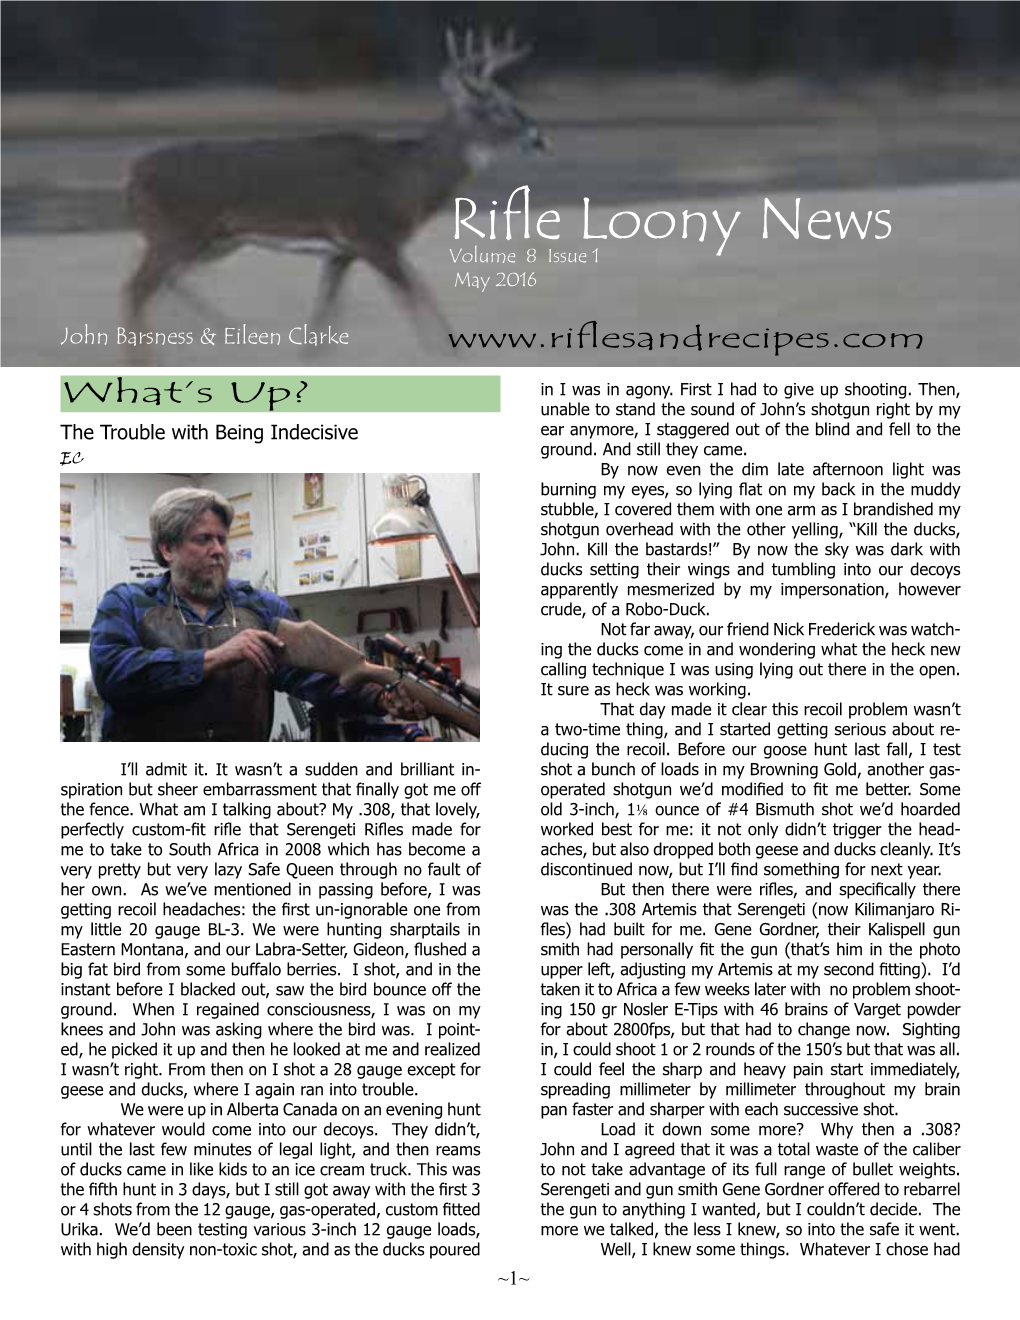 Rifle Loony News Volume 8 Issue 1 May 2016